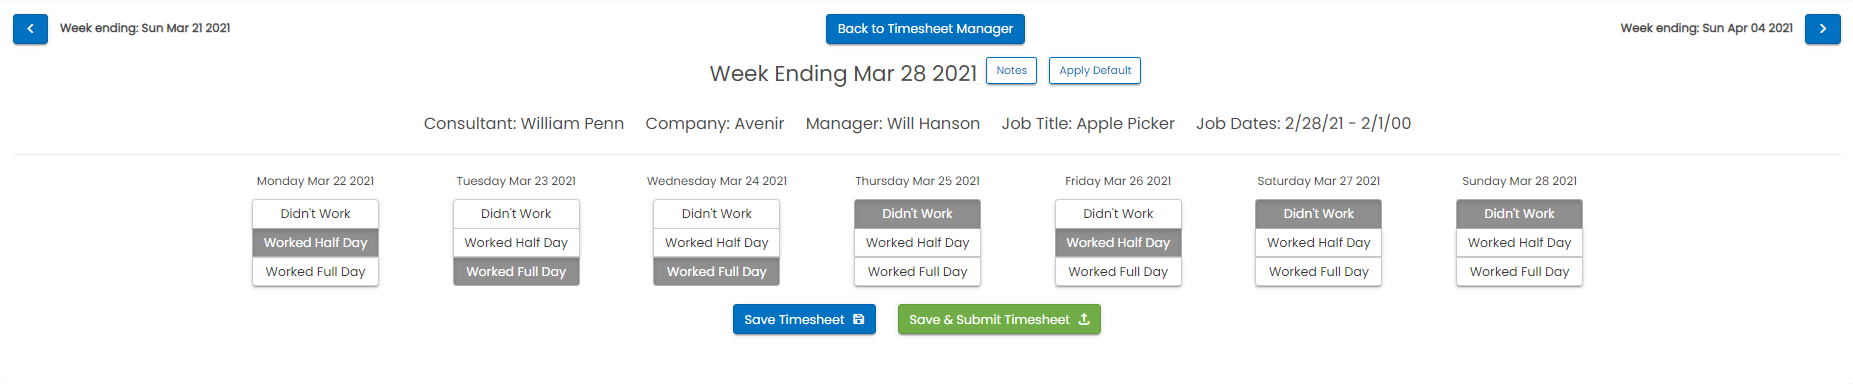 timesheet_manager_applicant.png